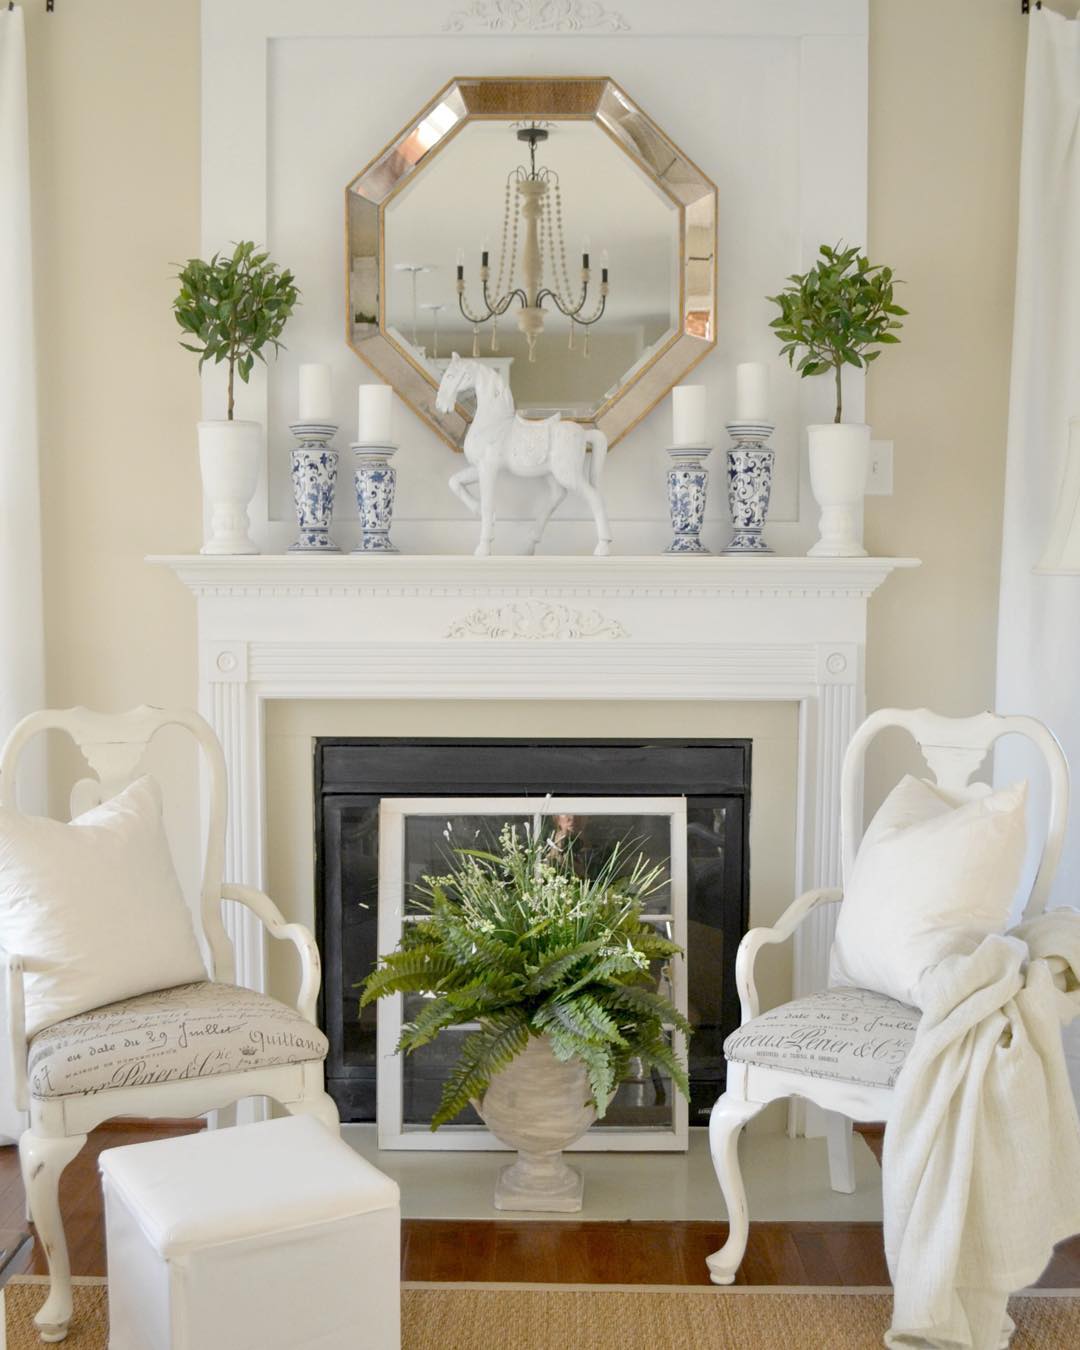 4. Classic White Elegance for a Sophisticated Summer Mantel